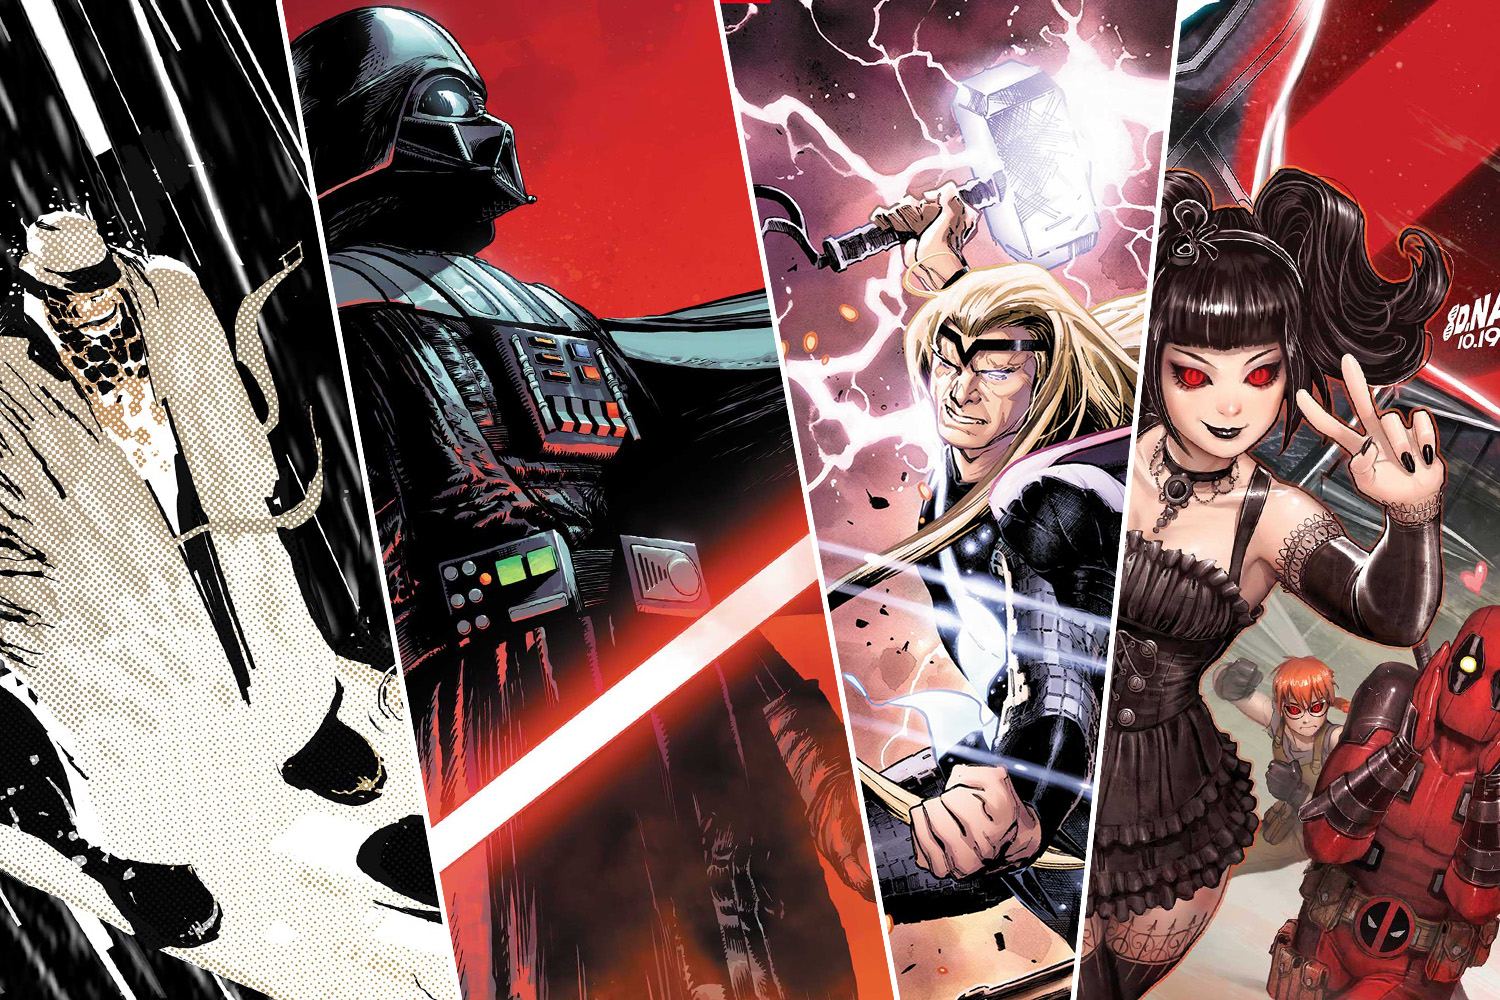 Marvel Comics’ February 2020 solicitations: Darth Vader reboots, new Noir, and Dawn of X collects